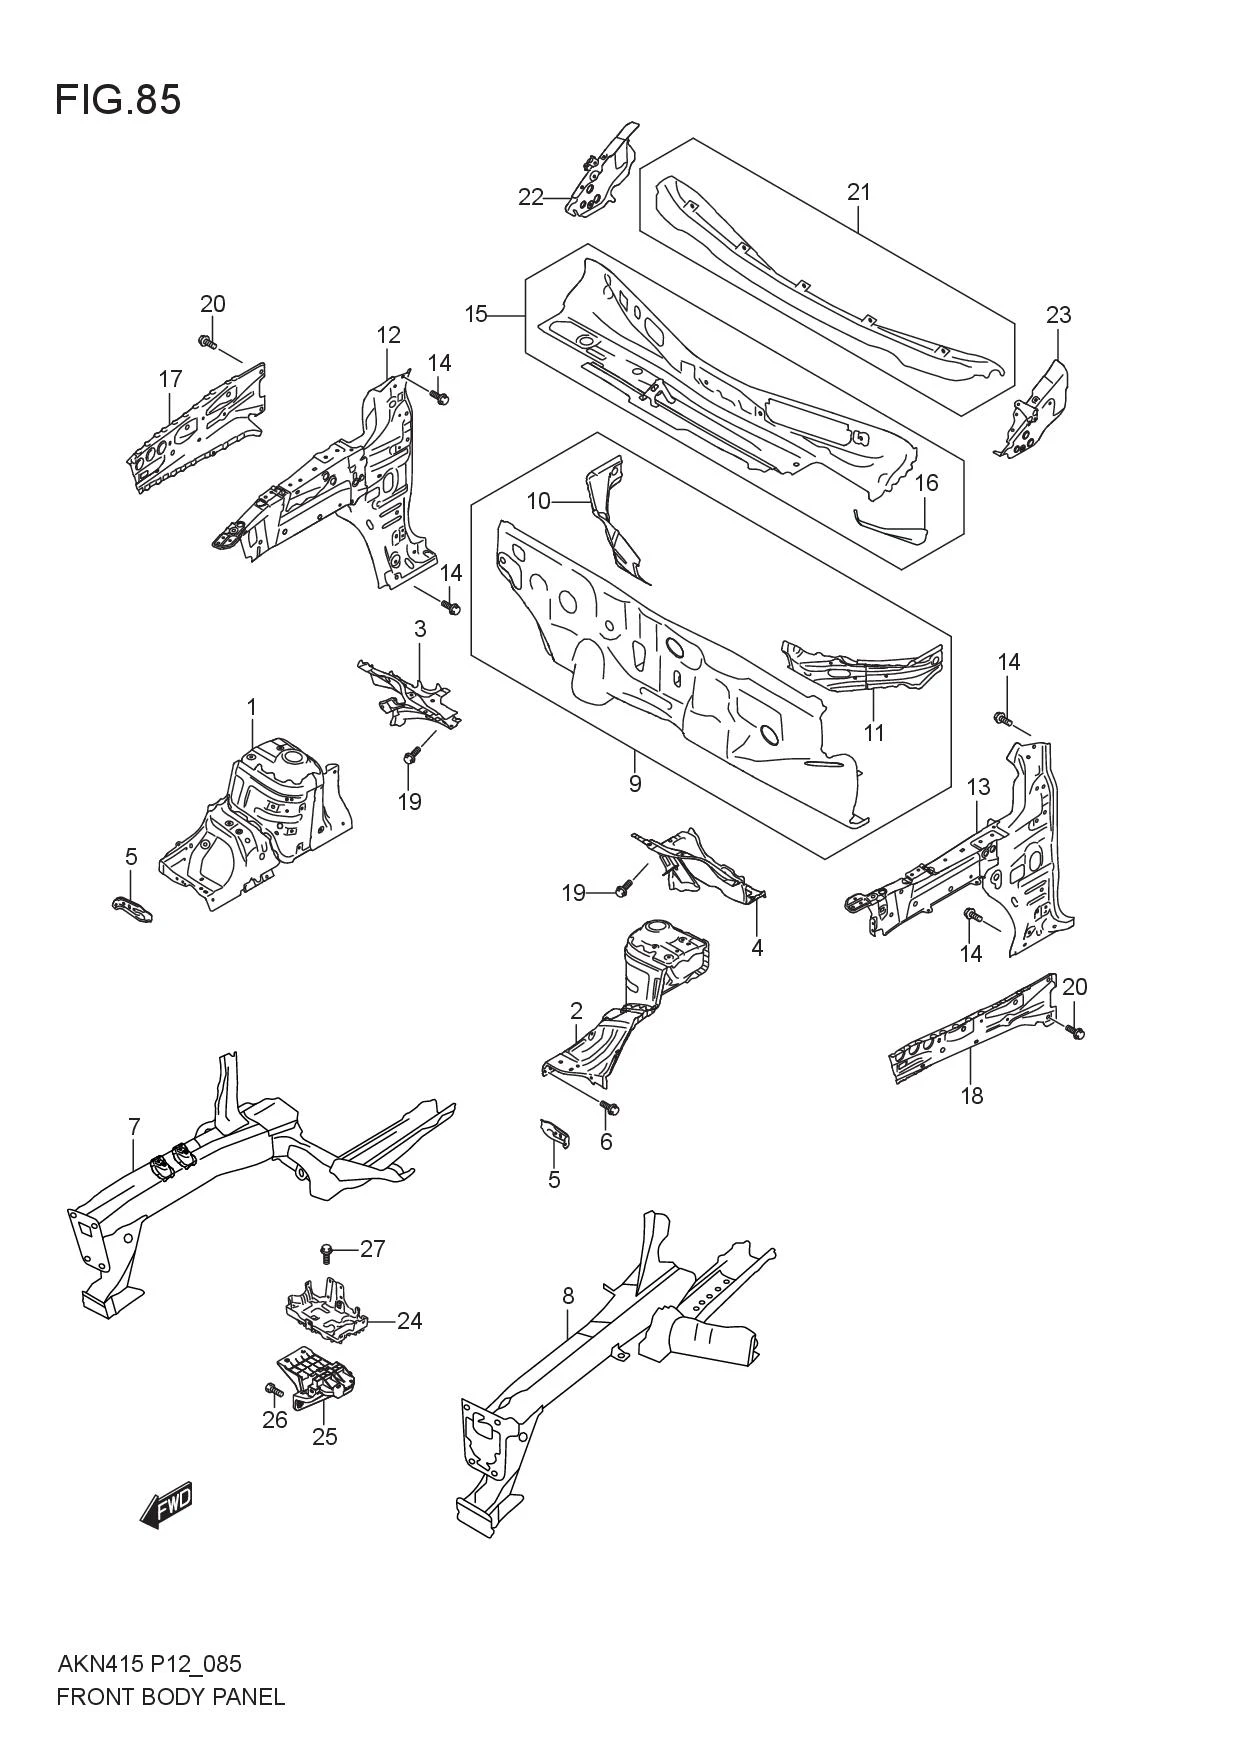 FIG.85 FRONT BODY PANEL